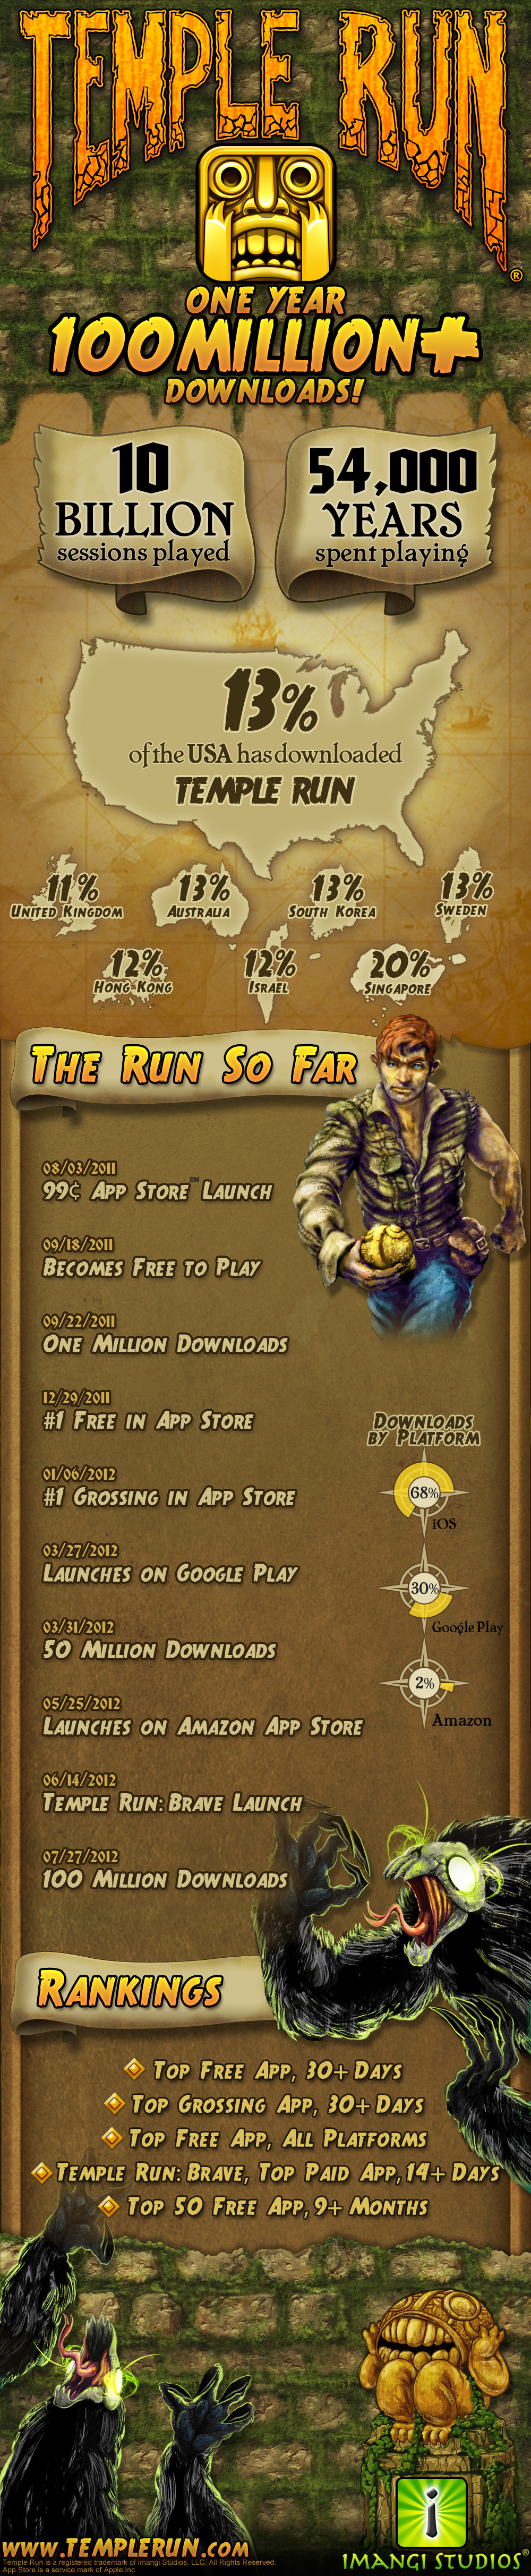 How Popular Is the Game Temple Run?